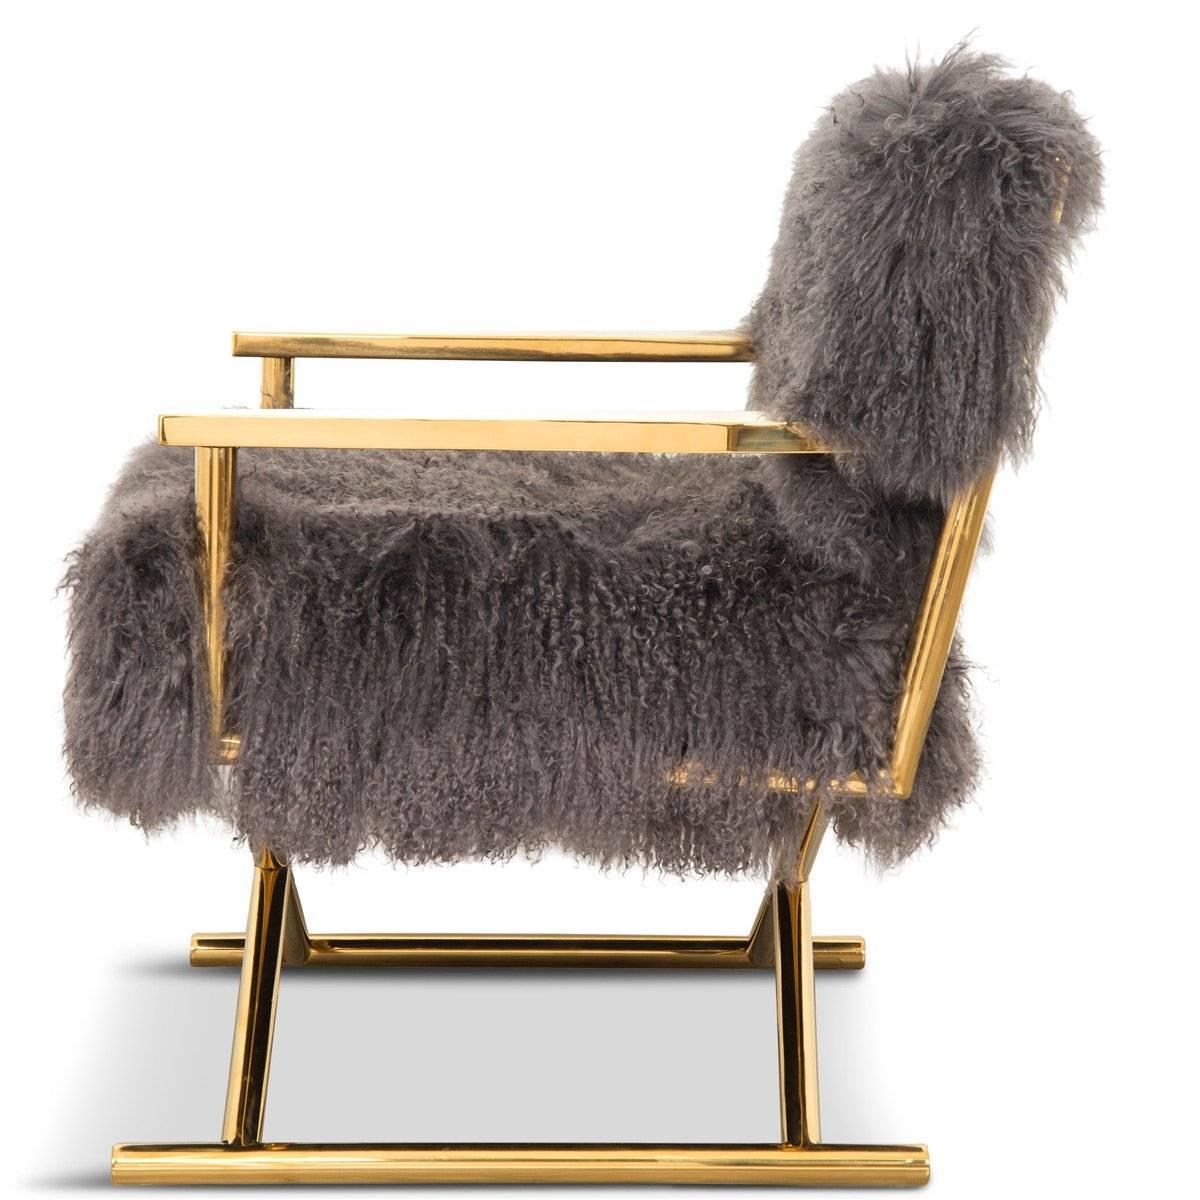 Polished Modern Style Directors Chair Ivory or Charcoal Mongolian Fur & Solid Brass Frame